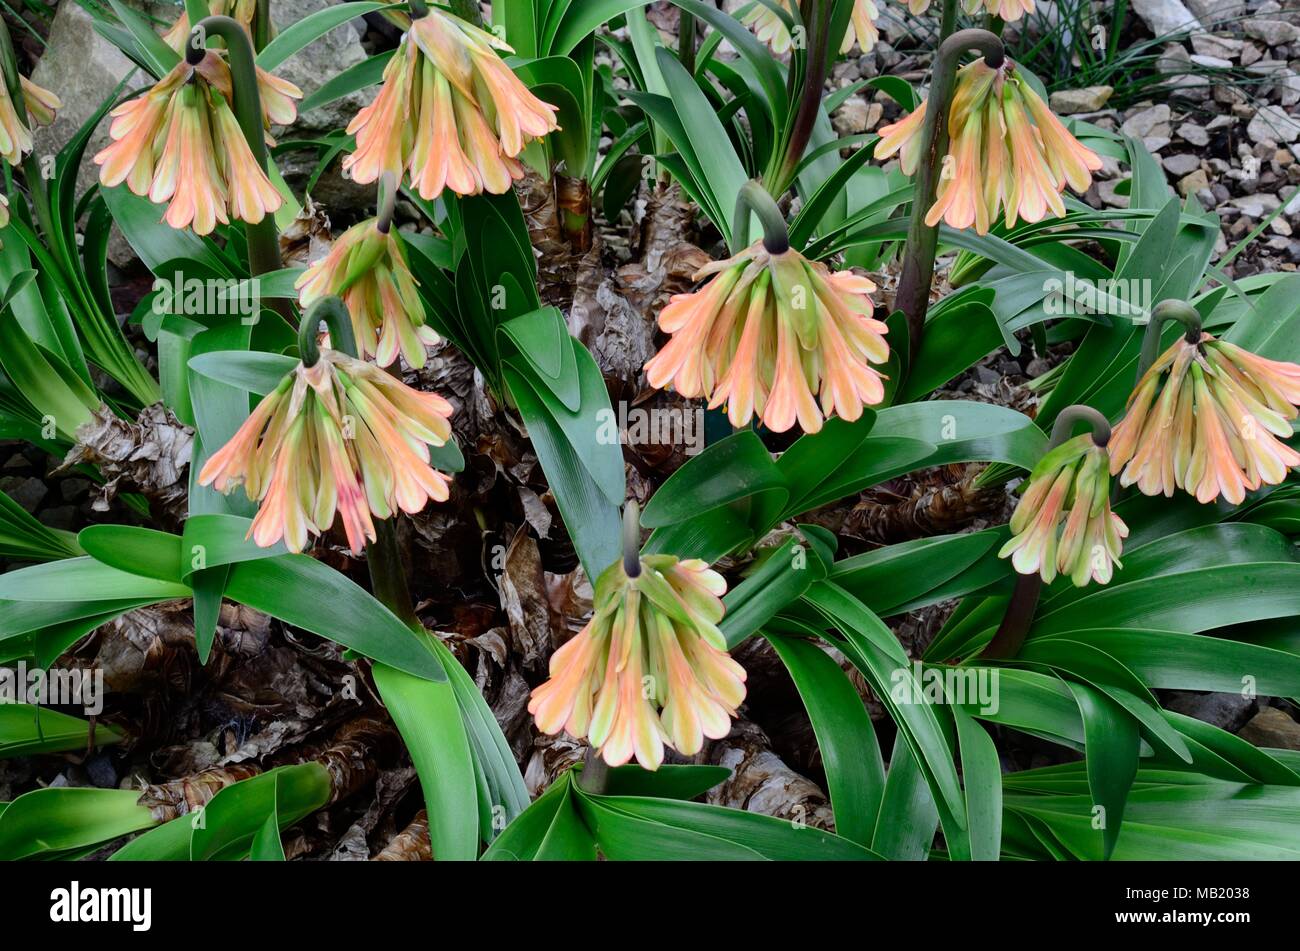 Cyrtanthus falactus or falactus fire lily flowering  plant of the amaryllis family Stock Photo